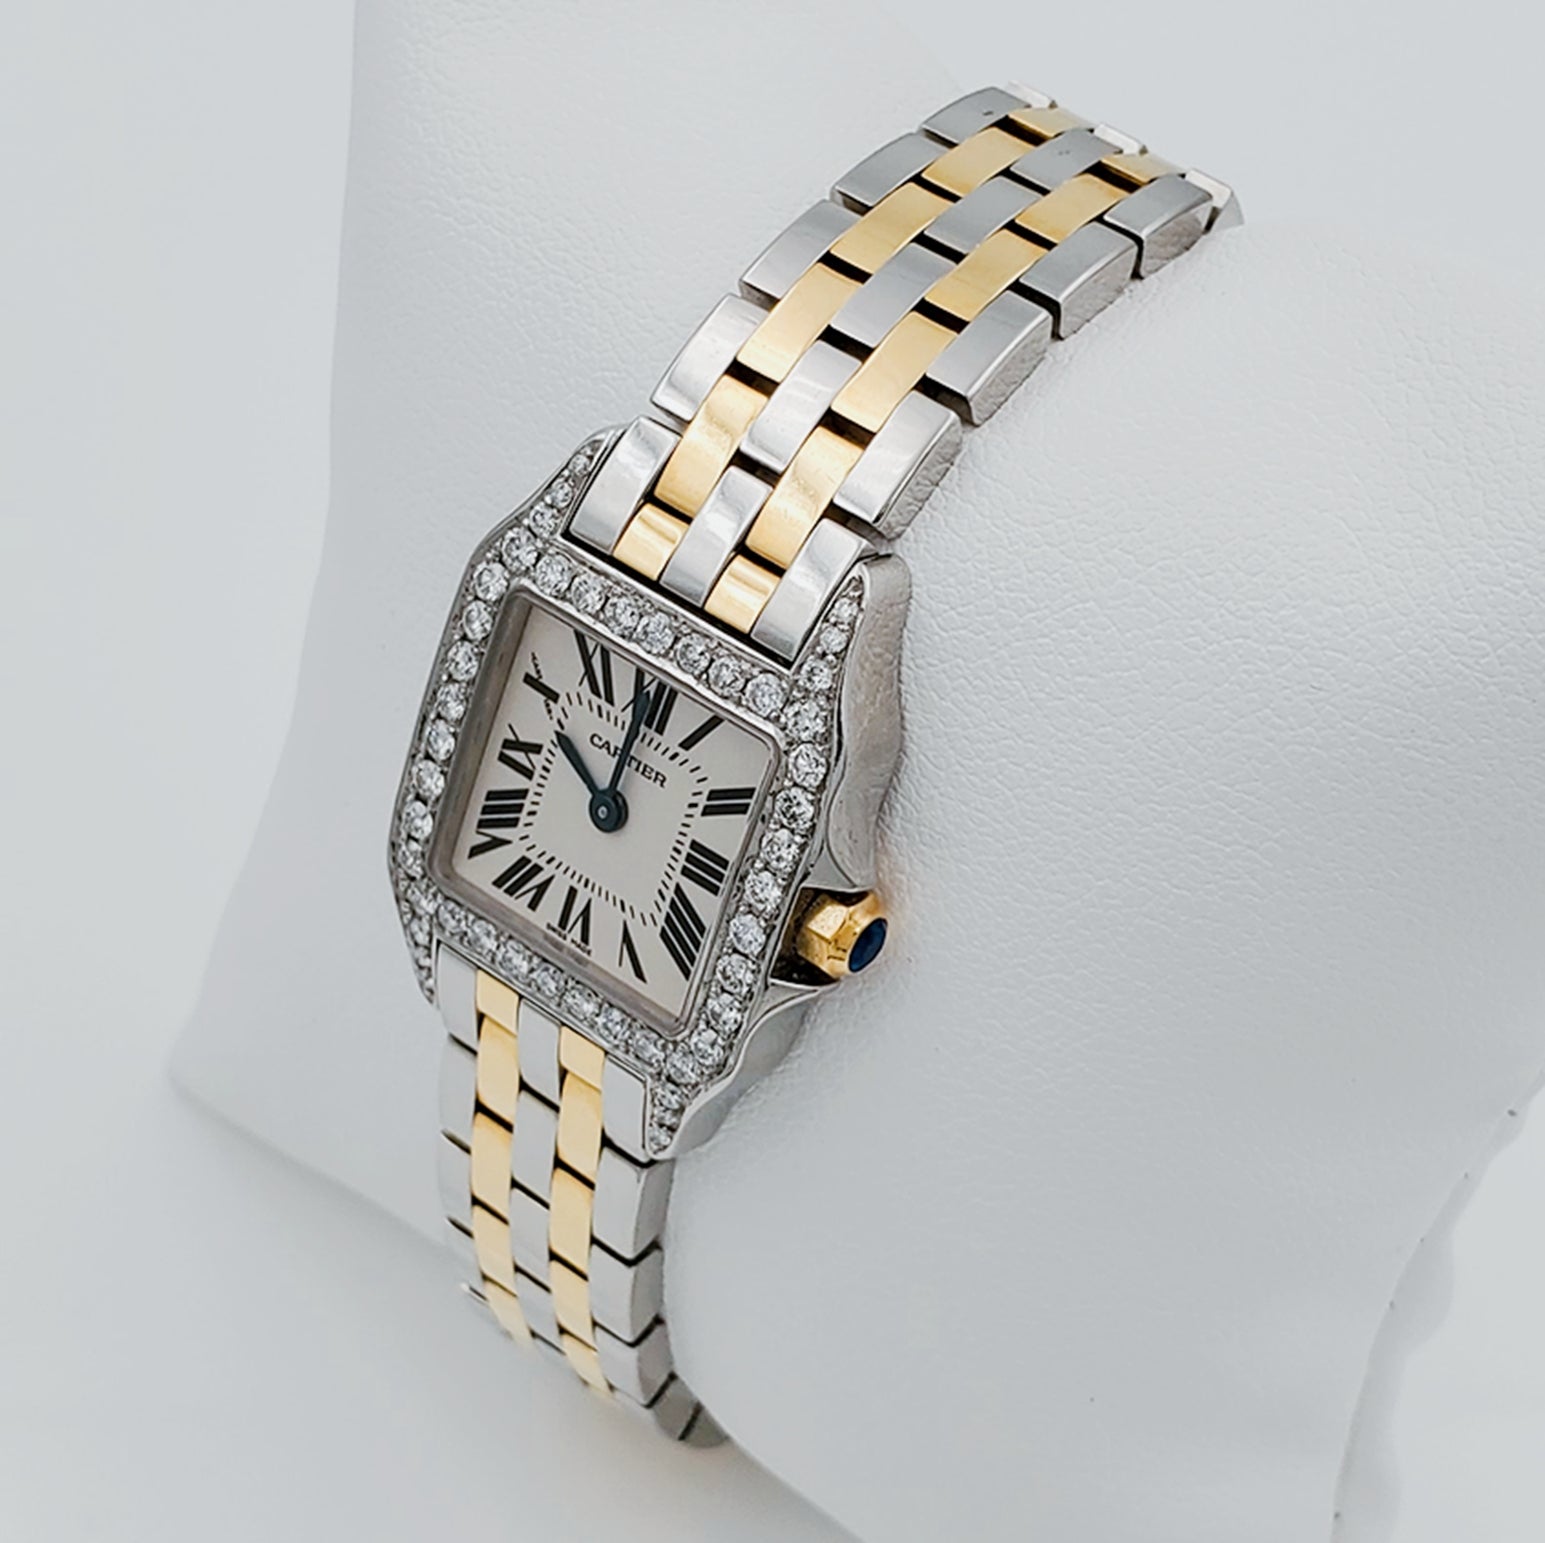 Ladies Small Cartier Santos Watch with Custom Diamond Bezel in Polished 18K Yellow Gold and Stainless Steel. (Pre-Owned)